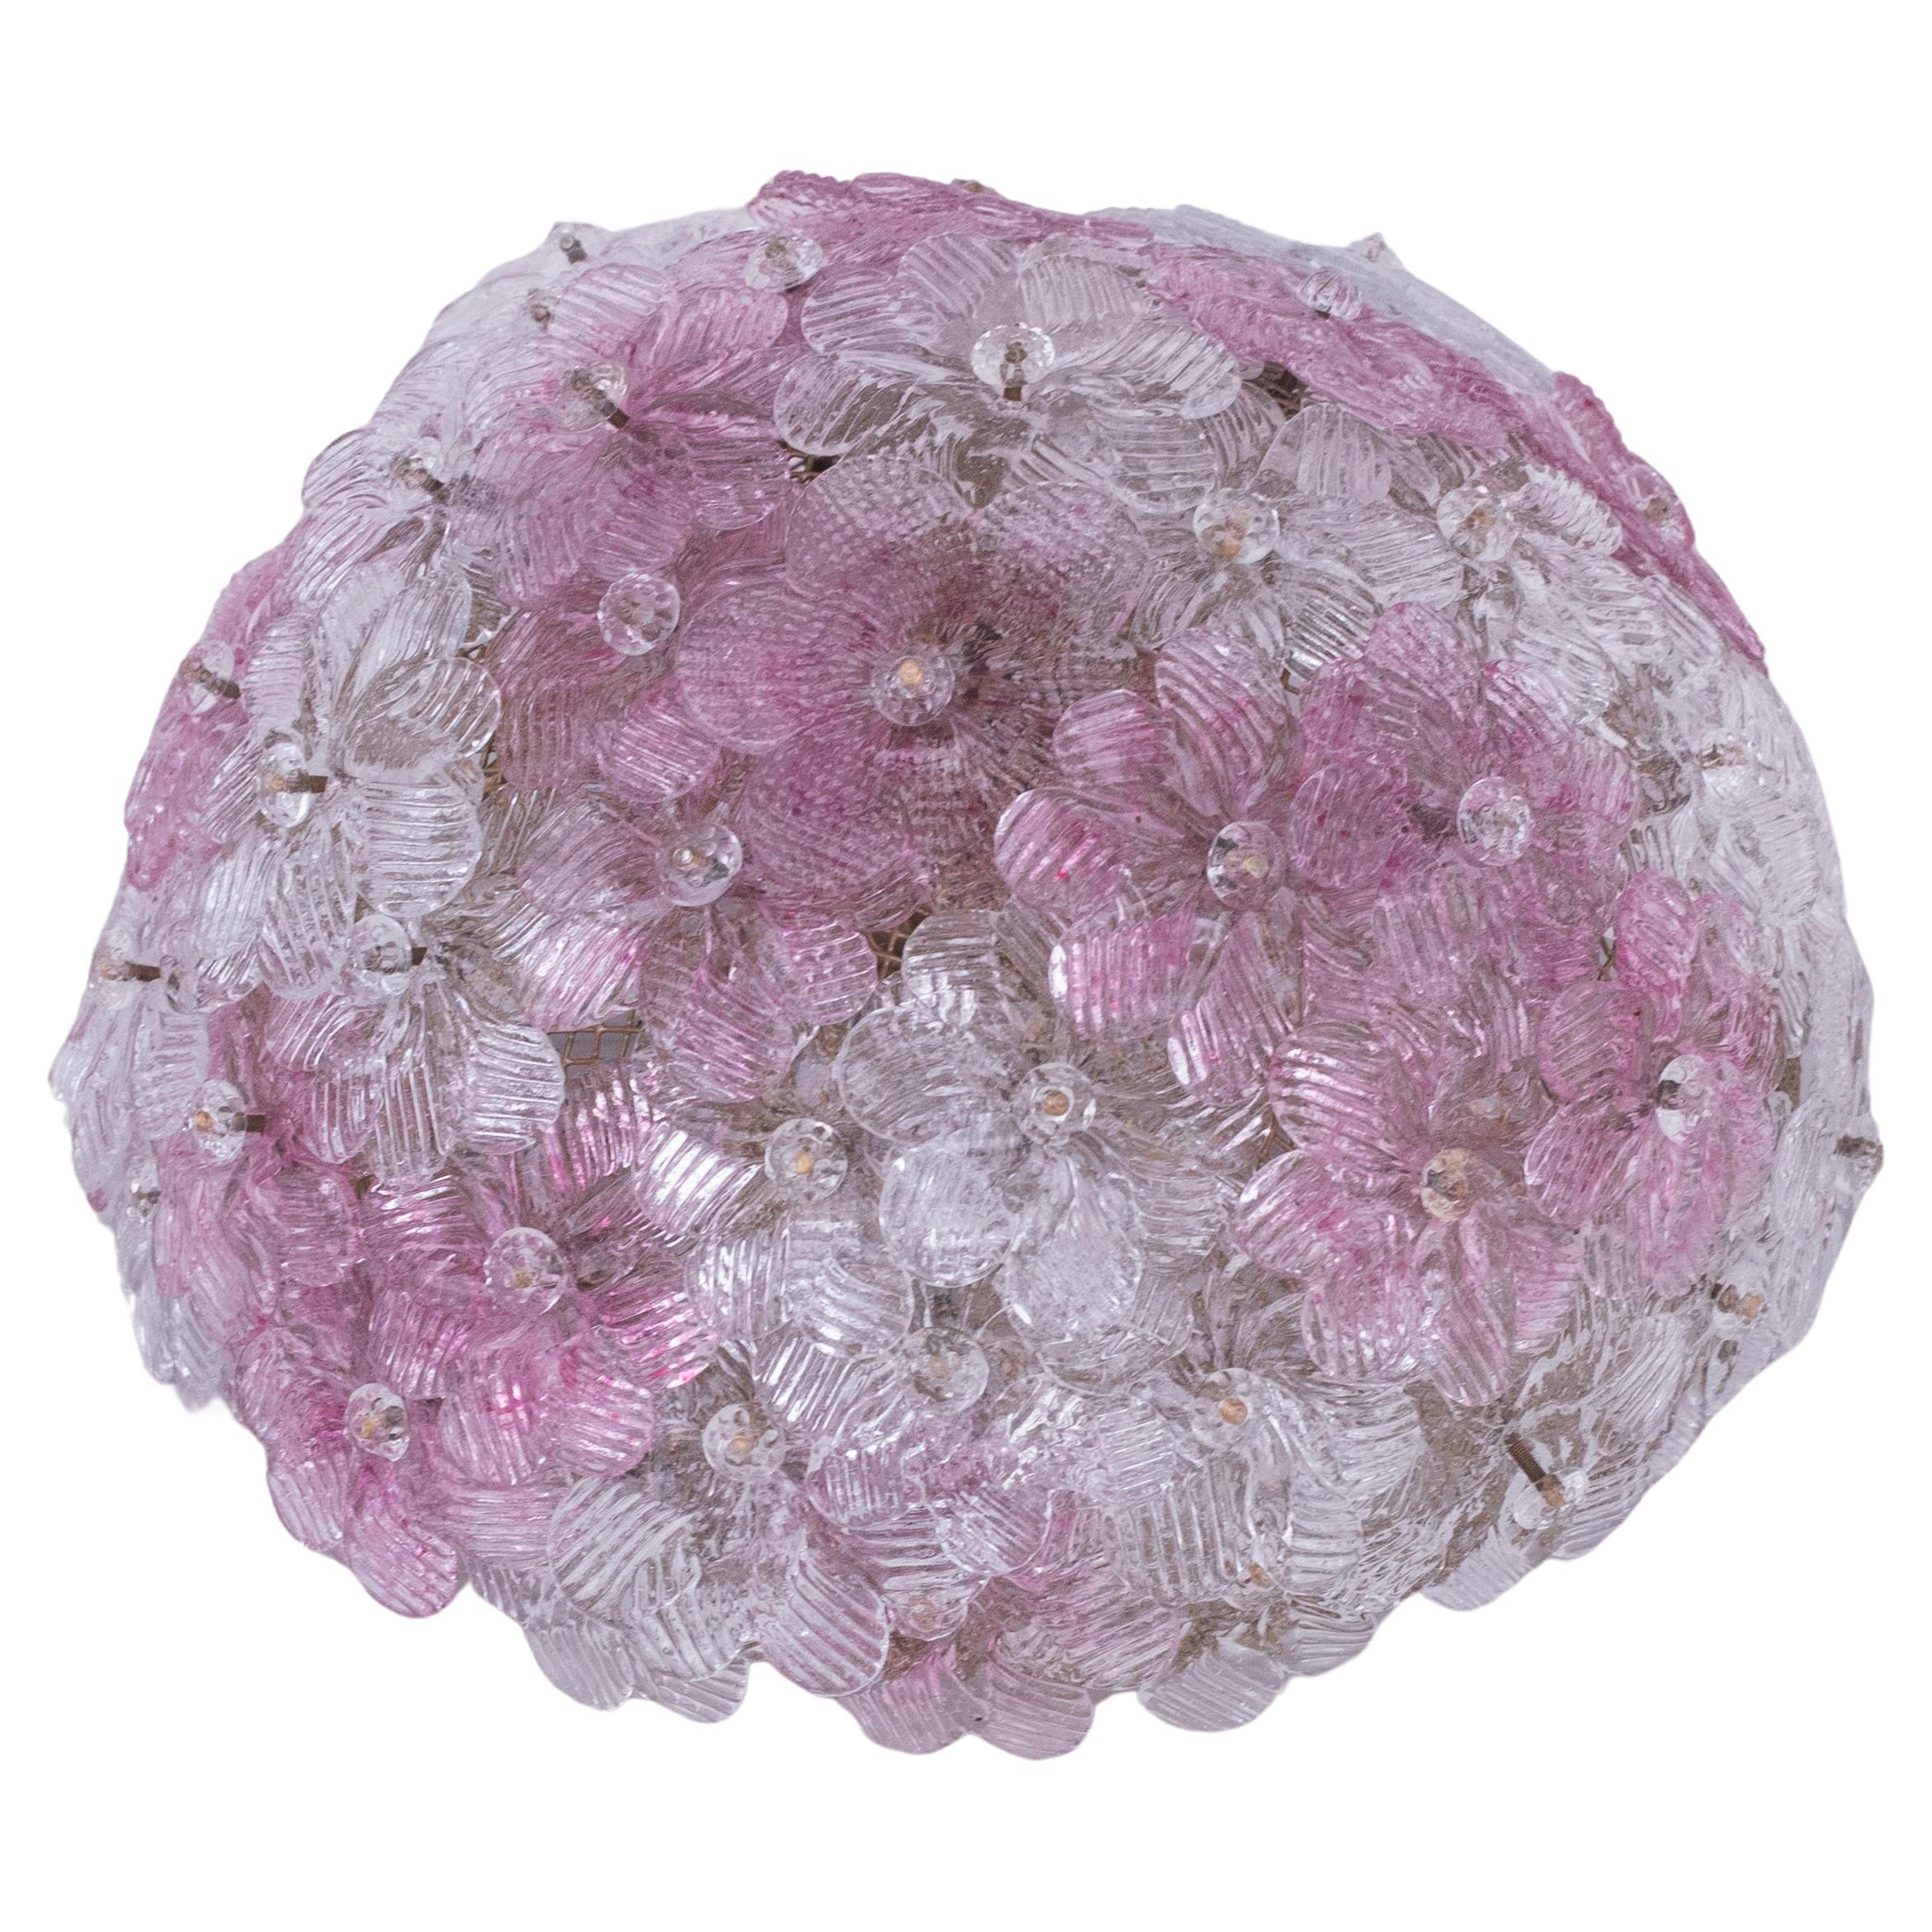 Pretty three-light ceiling lamp with pink and trasparent Murano glass flowers, made by Seguso for Venin, Italy, 1960s.
metal ceiling basket with overlapping flowers made of hand-blown Murano glass in pink and transparent color, attached